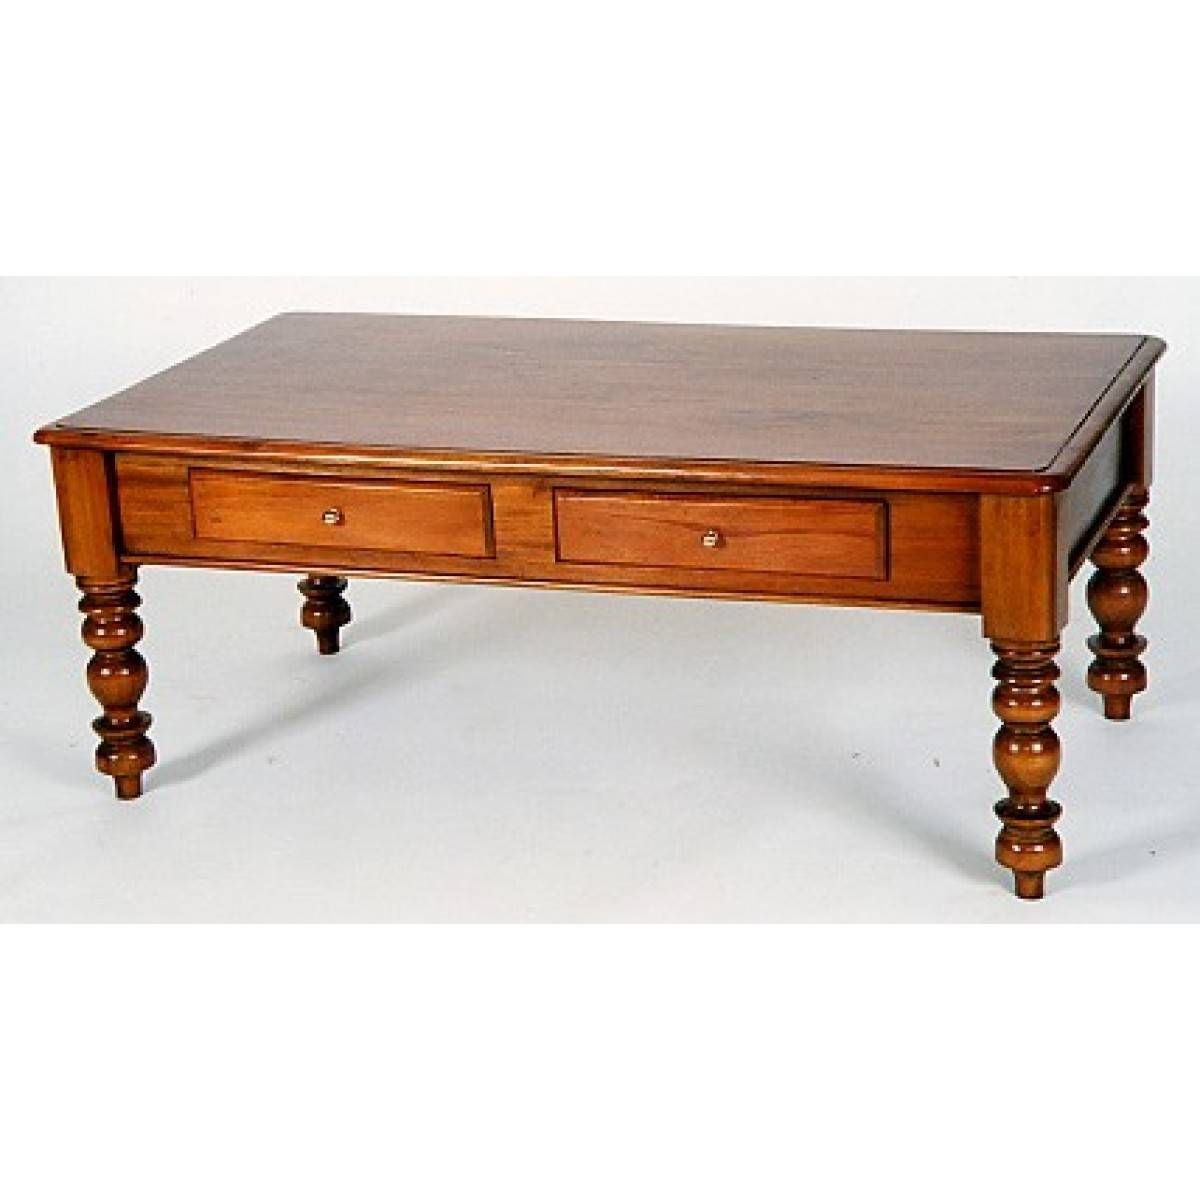 Colonial Two Drawer Coffee Table With Regard To Colonial Coffee Tables (View 7 of 30)